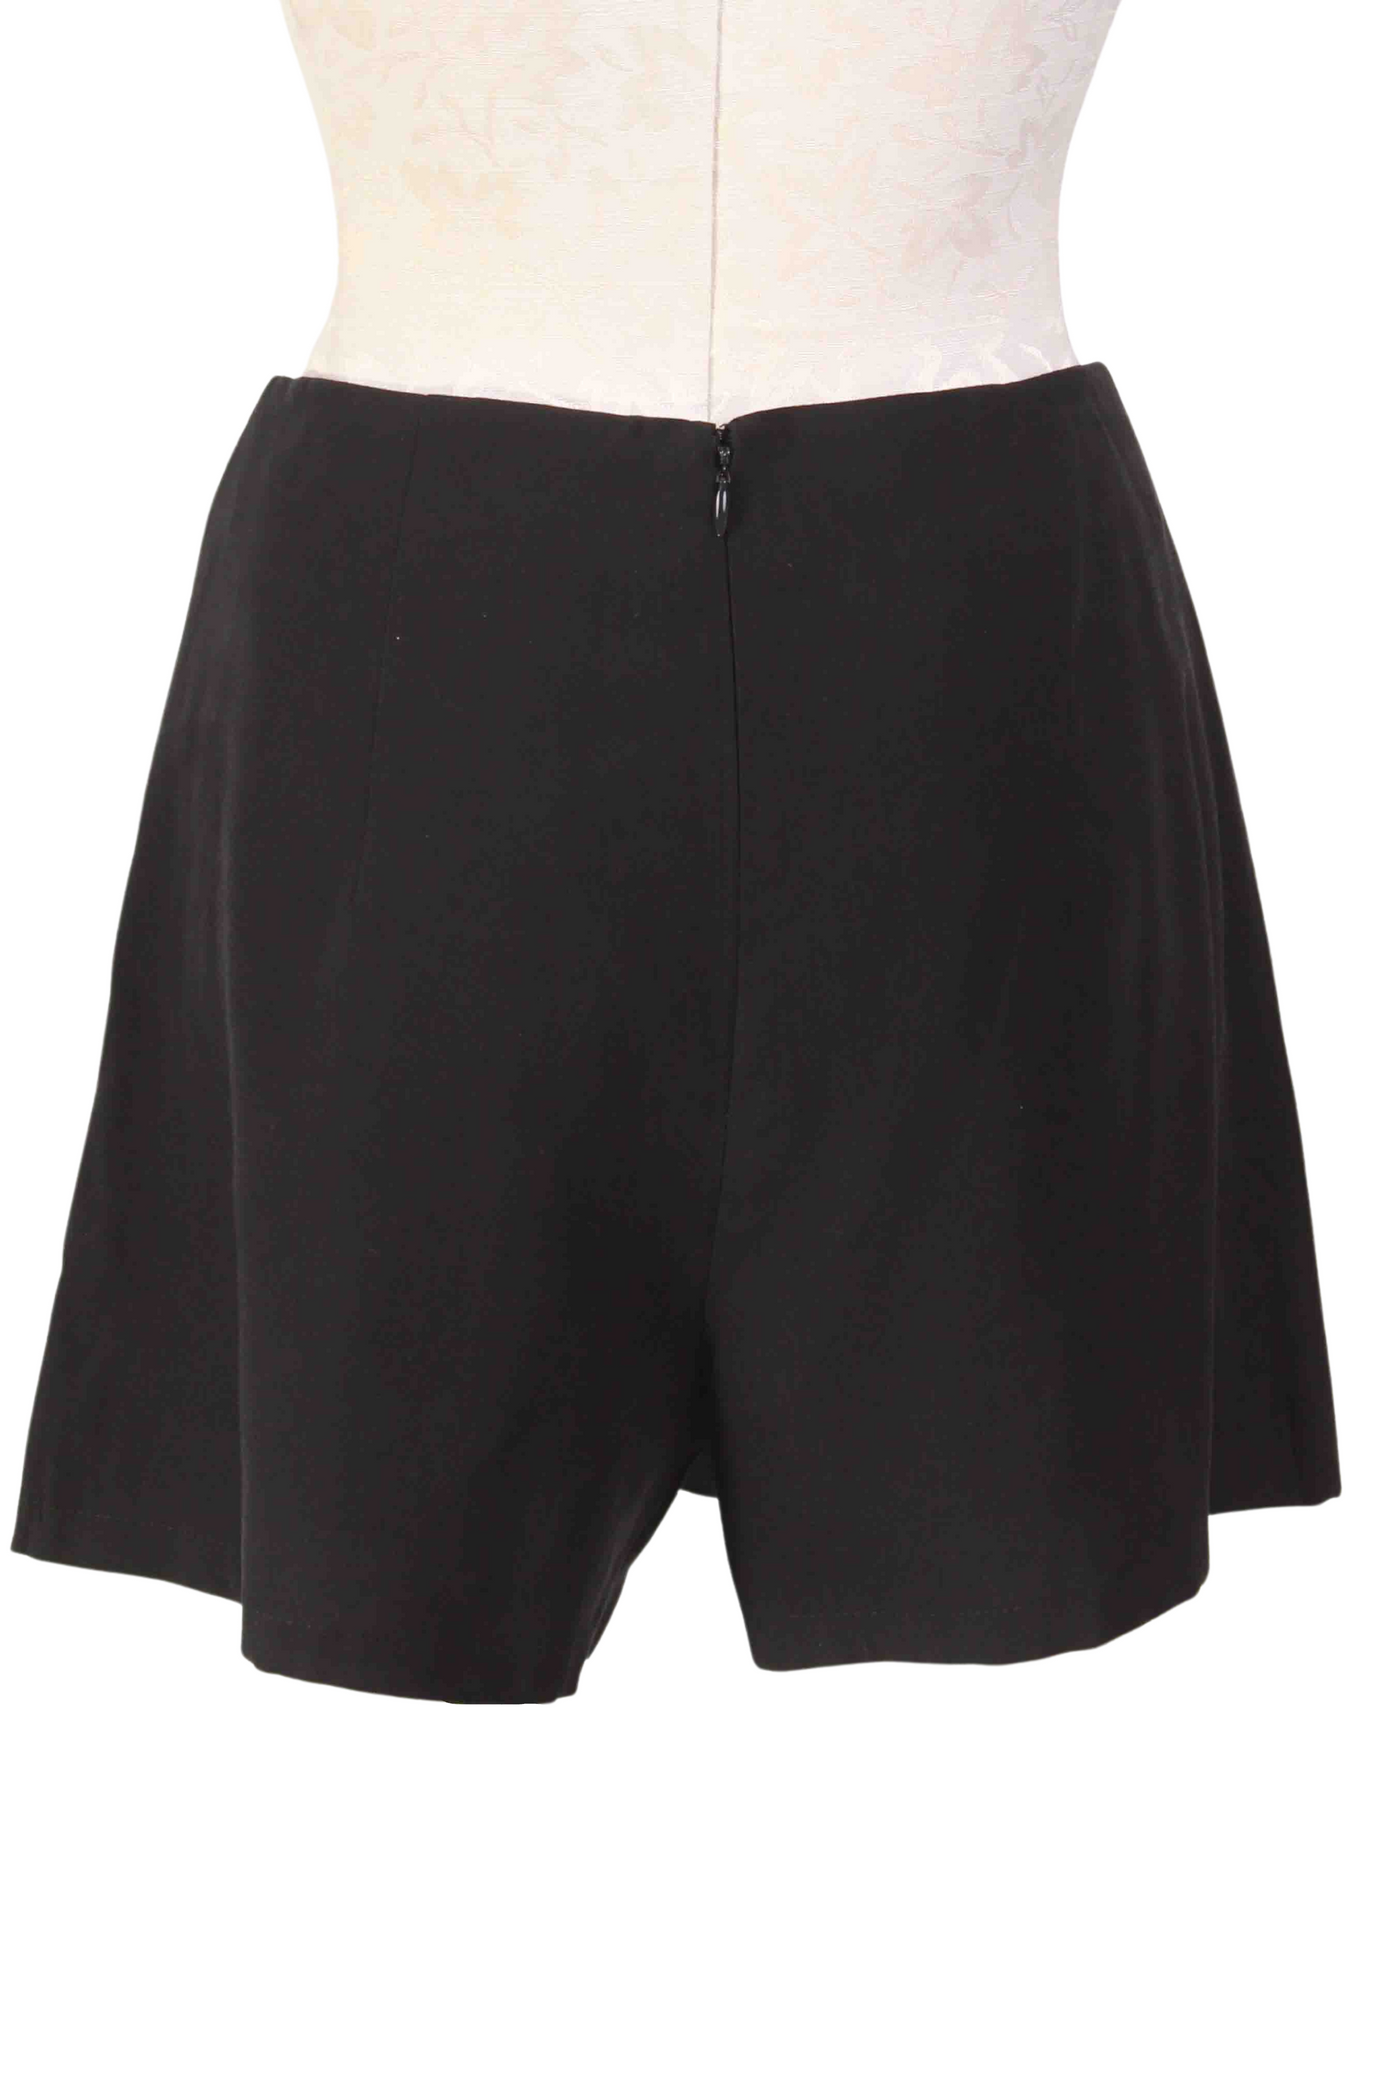 back view of Black Twill Dress Shorts by Apricot with a back zipper